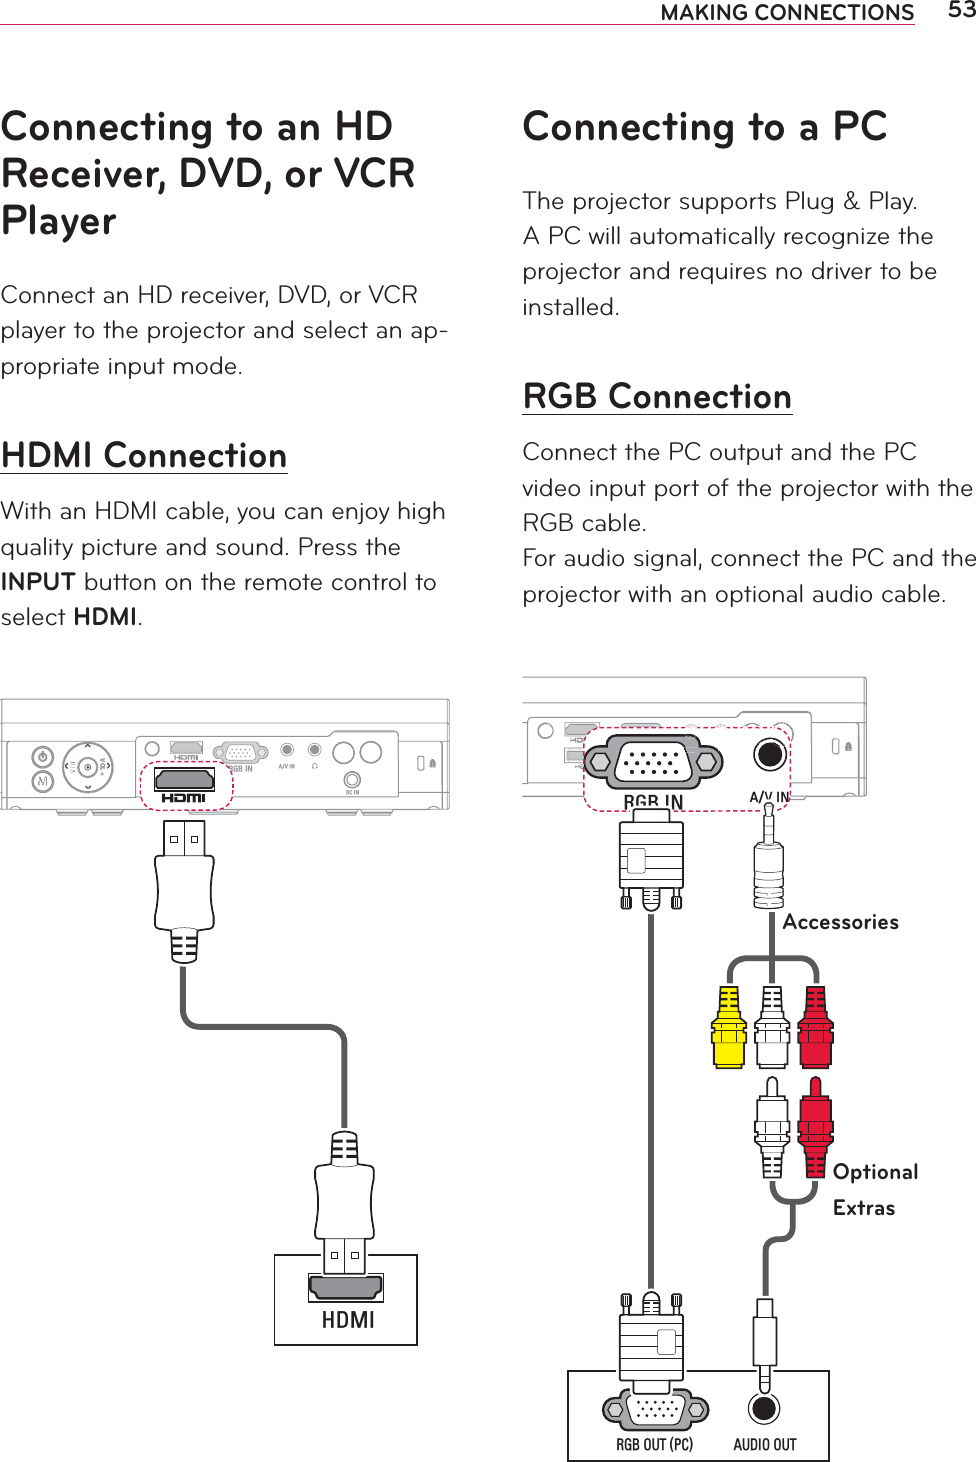 53MAKING CONNECTIONSConnecting to an HD Receiver, DVD, or VCR PlayerConnect an HD receiver, DVD, or VCR player to the projector and select an ap-propriate input mode. HDMI ConnectionWith an HDMI cable, you can enjoy high quality picture and sound. Press the INPUT button on the remote control to select HDMI. $9,1&apos;&amp;,15*%,1VOL ++&apos;0,Connecting to a PCThe projector supports Plug &amp; Play. A PC will automatically recognize the projector and requires no driver to be installed. RGB ConnectionConnect the PC output and the PC video input port of the projector with the RGB cable. For audio signal, connect the PC and the projector with an optional audio cable.      &apos;&amp;,15*%,1$9,15*%,1$8&apos;,22875*%2873&amp;AccessoriesOptional Extras